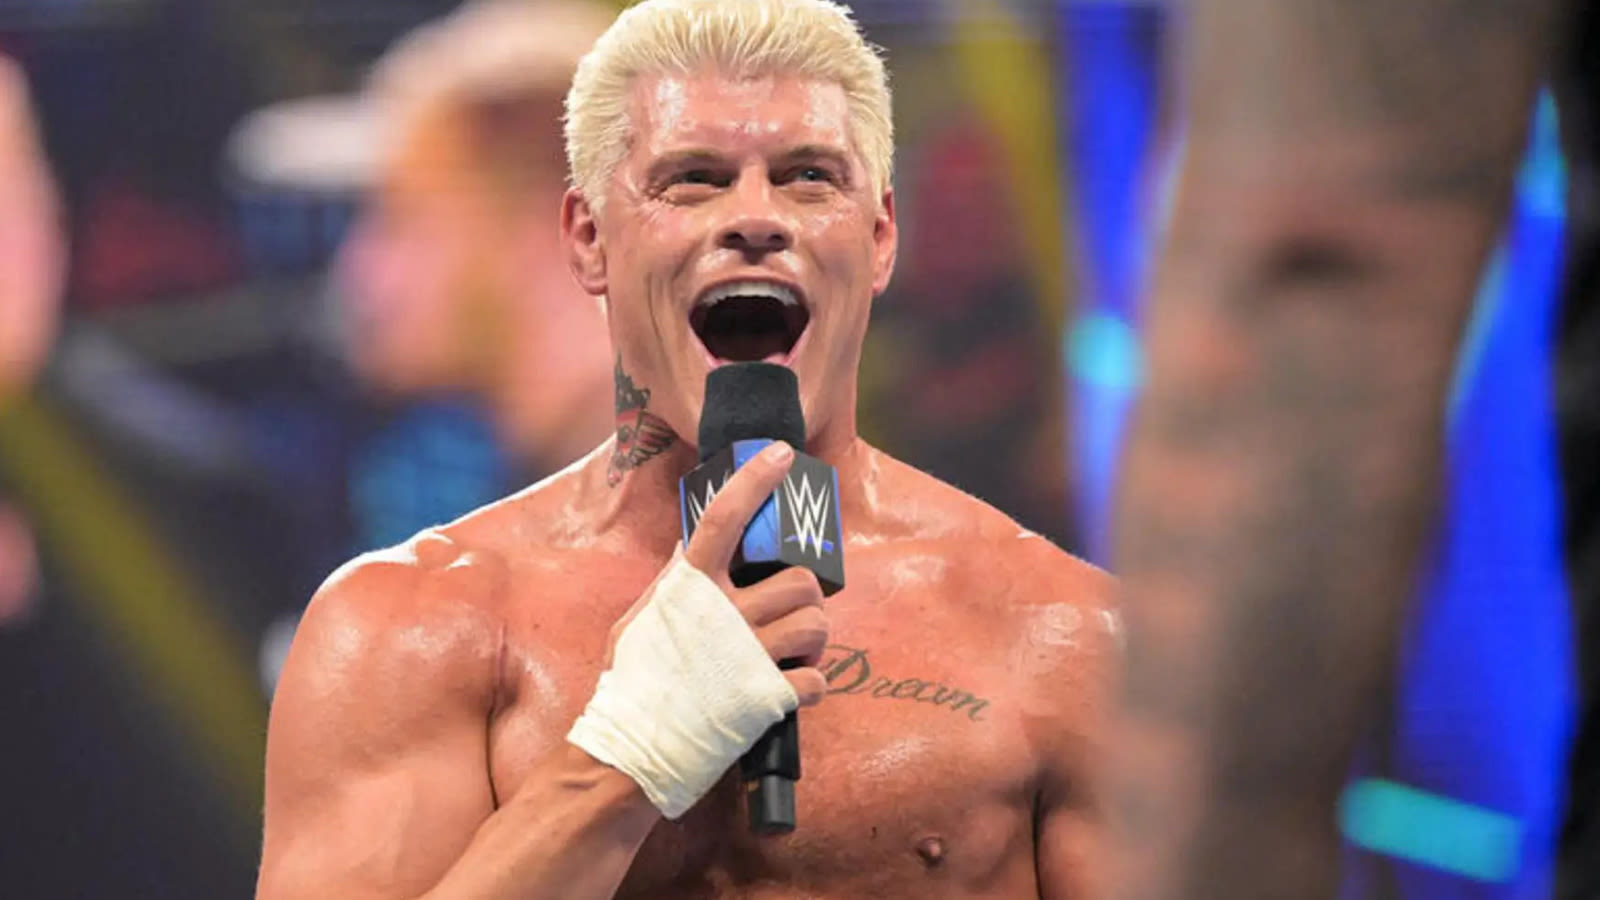 The Undertaker Says Cody Rhodes Will Have Even Bigger Run In WWE, With One Difference - Wrestling Inc.